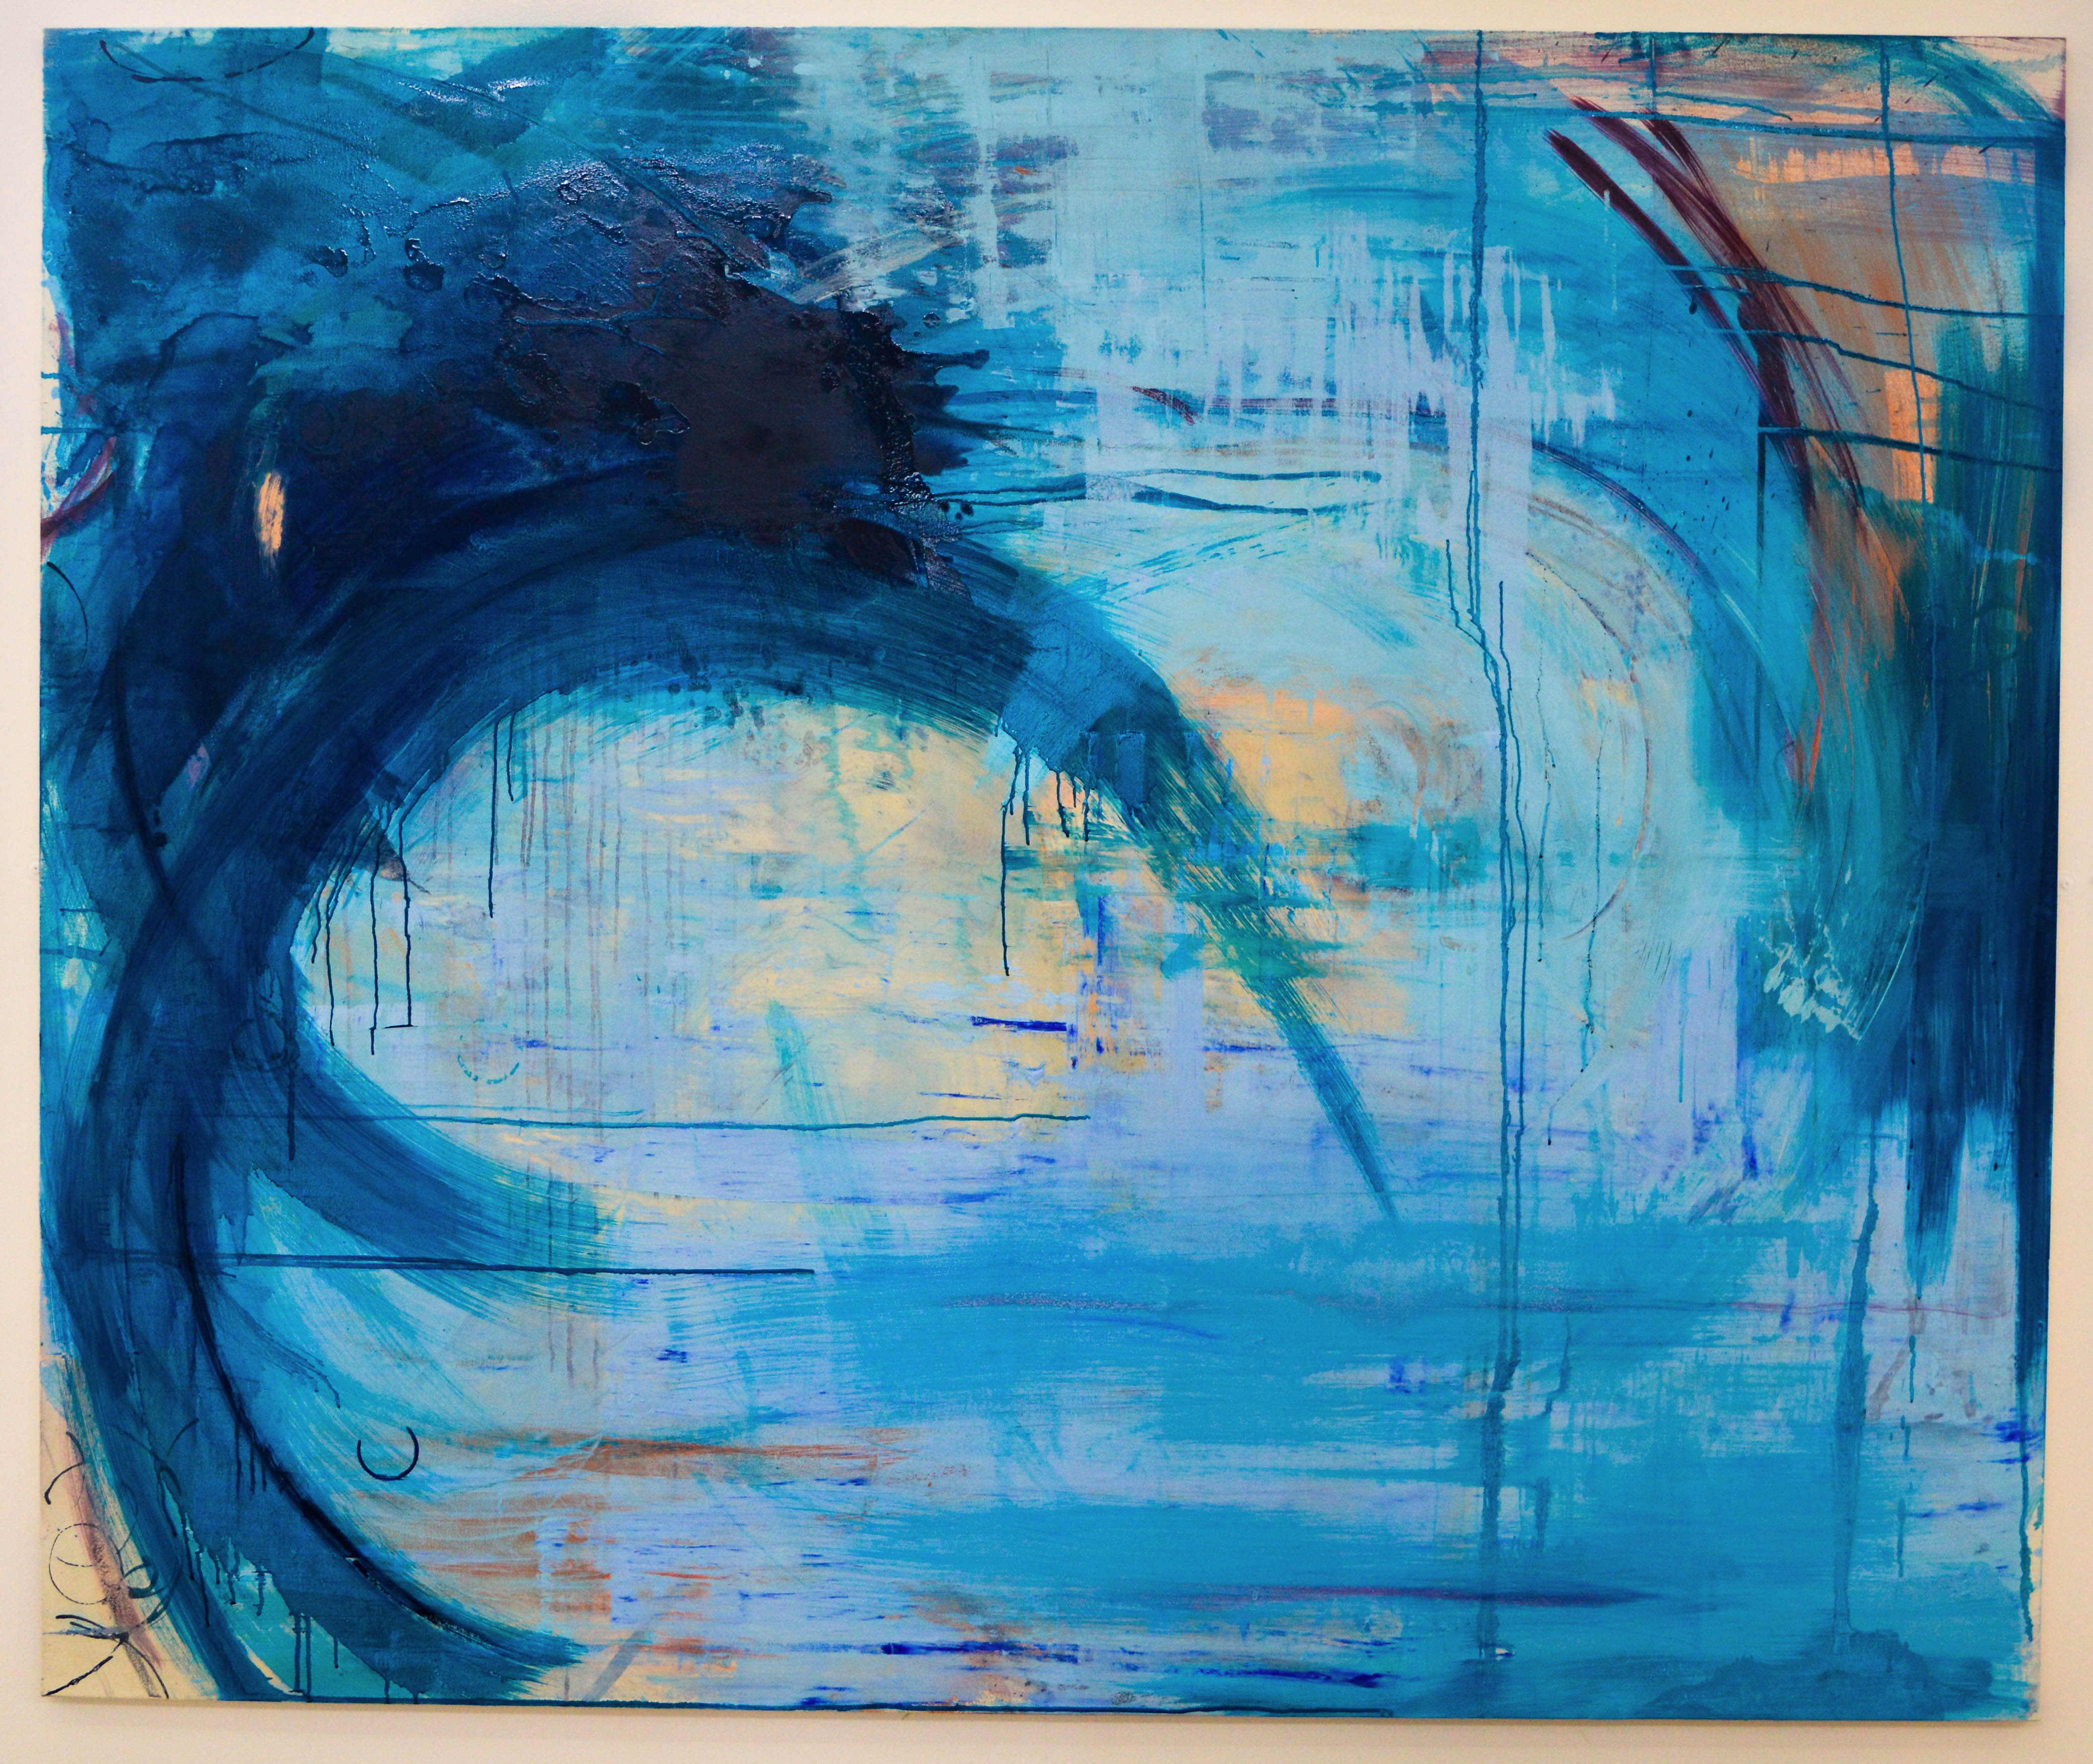 Blue Series 1. Oil on canvas. 213x177.5cm. For sale.